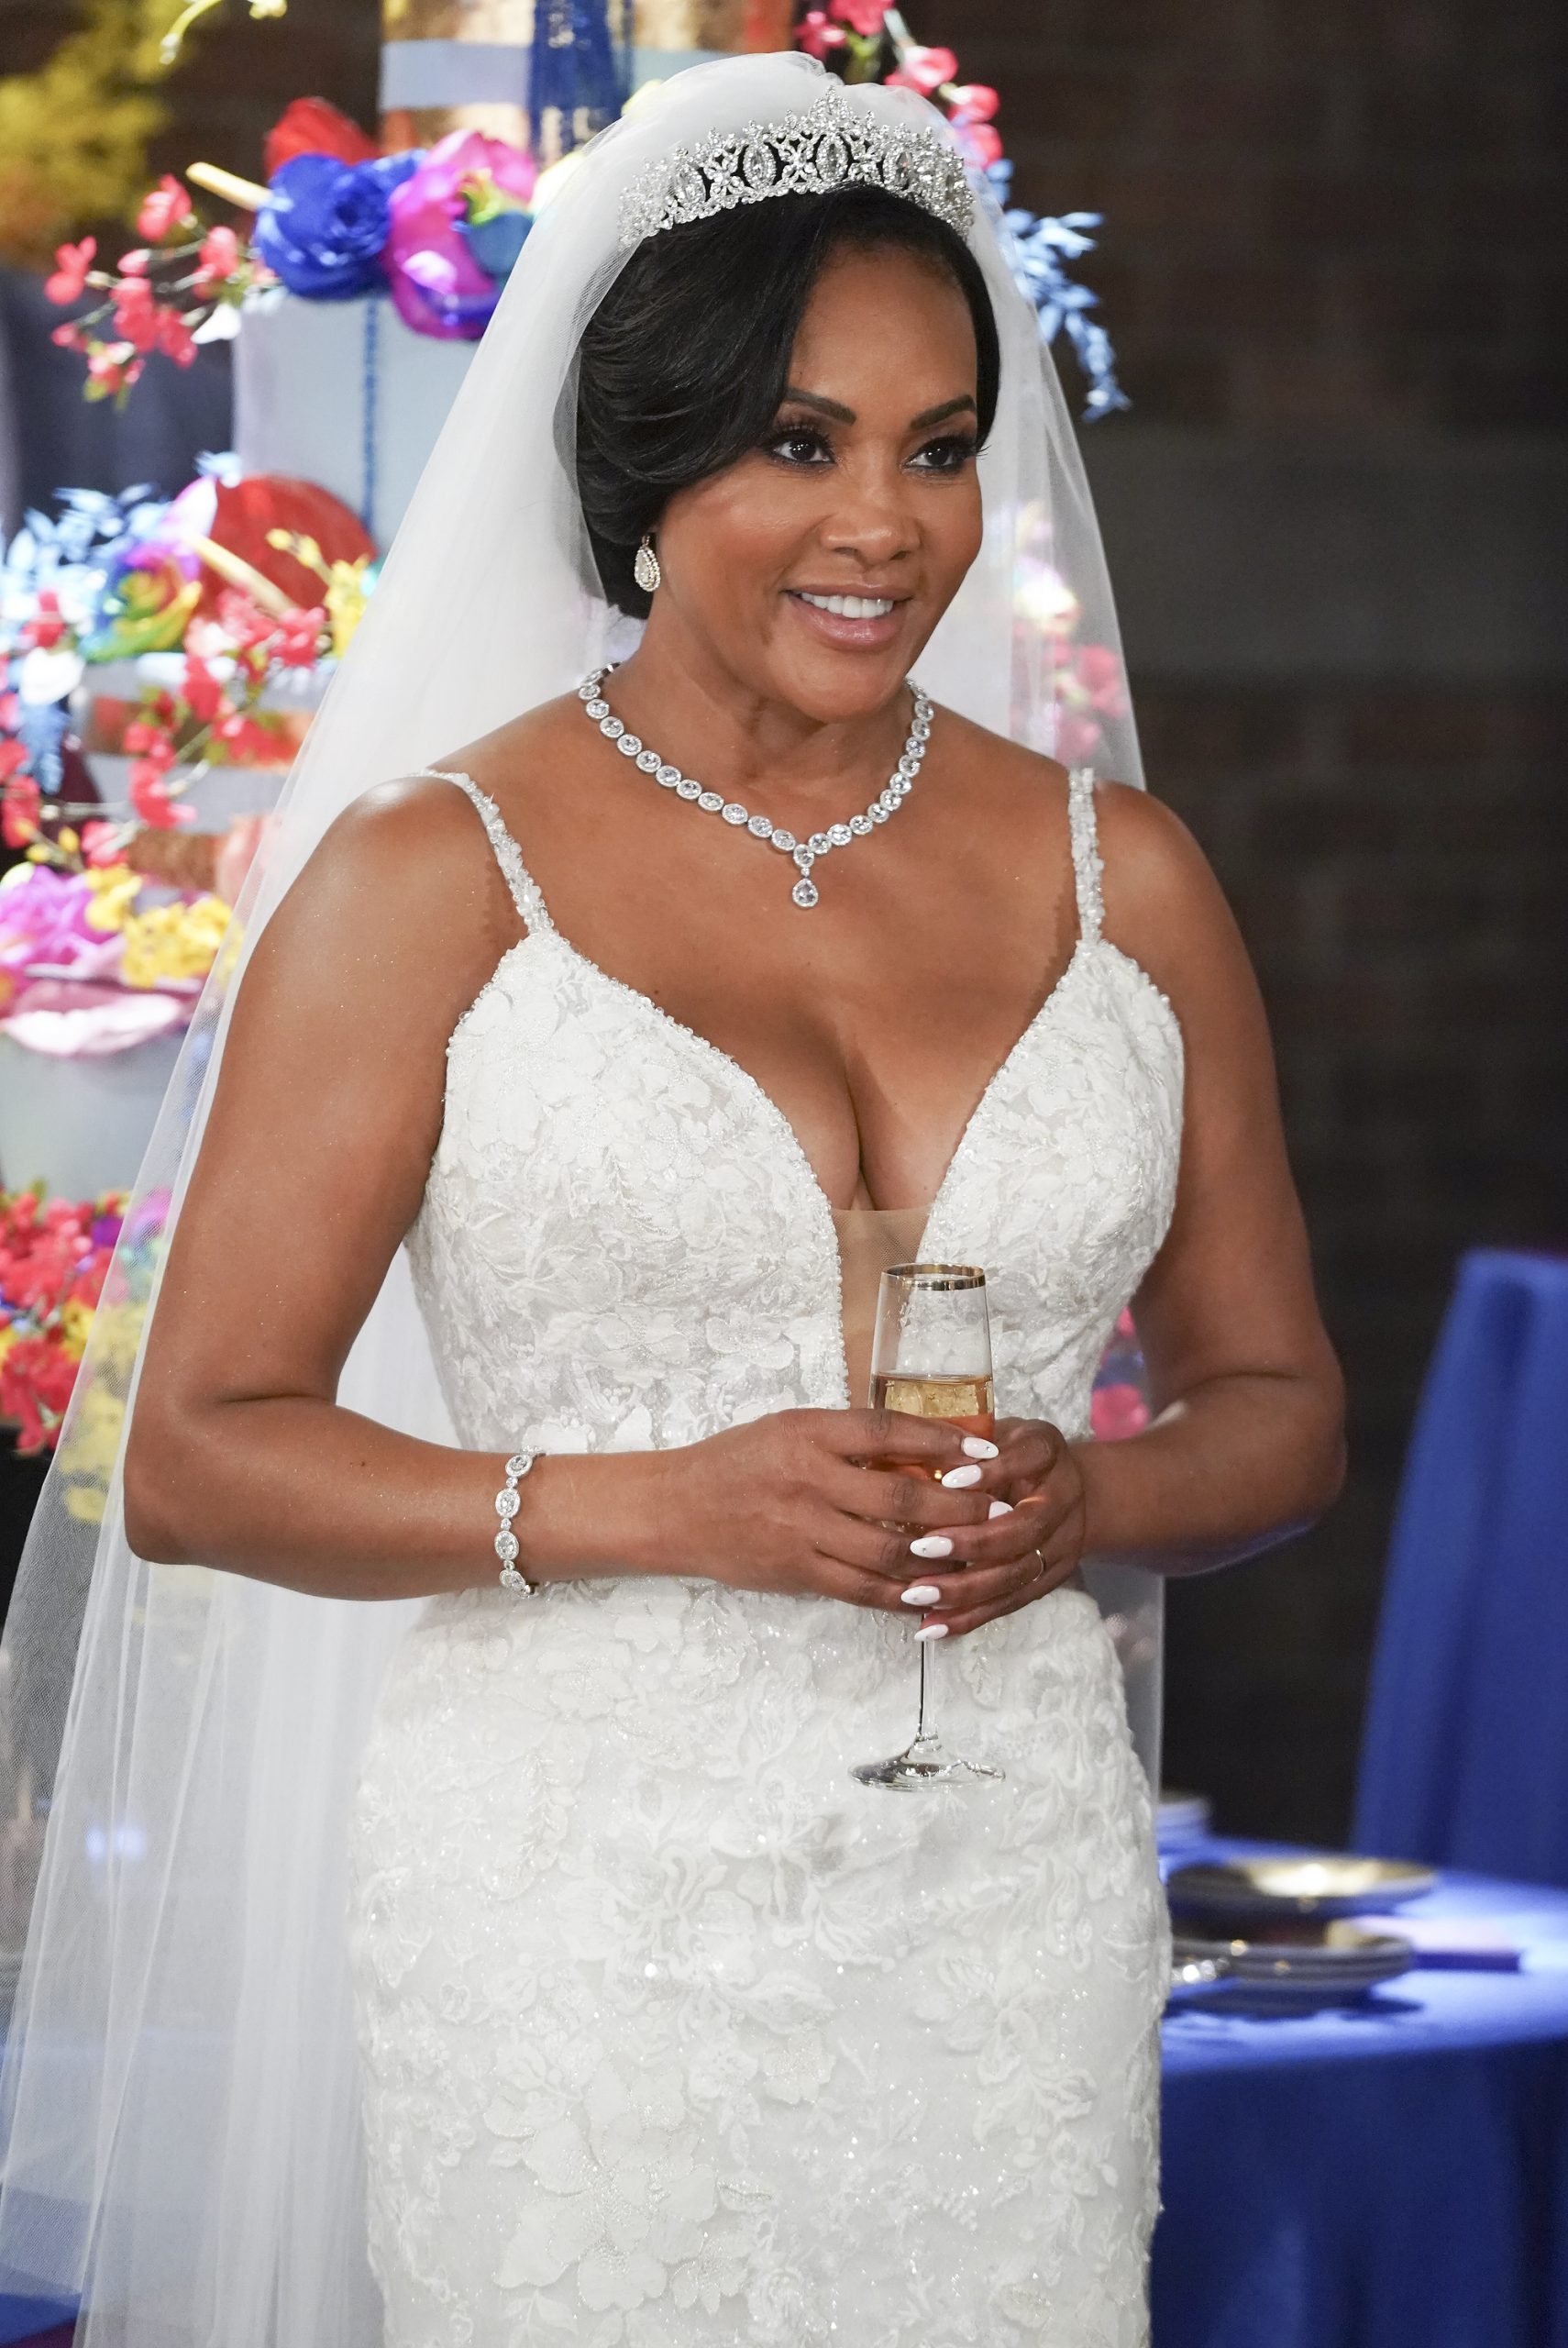 First Look: Vivica A. Fox Guest Appearance On ‘Black-ish’